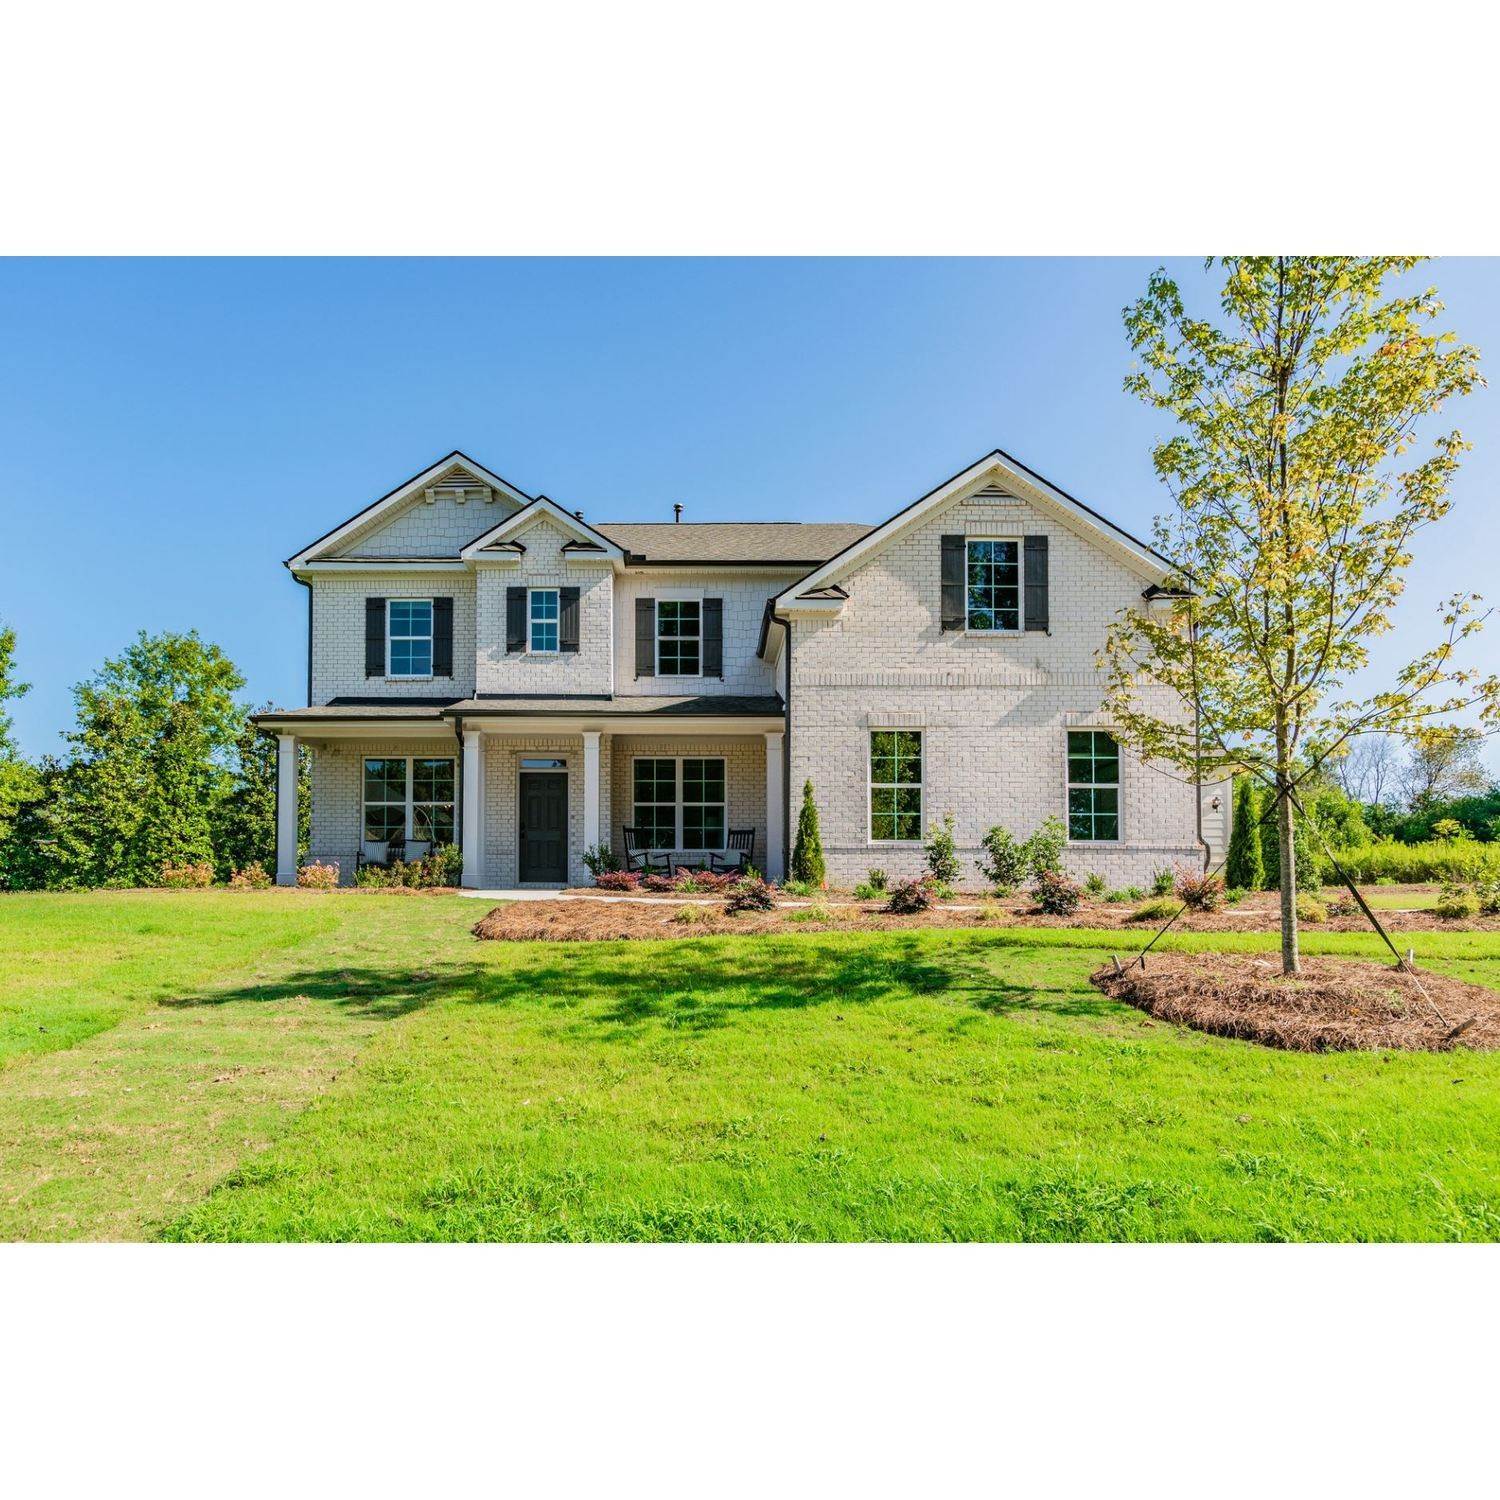 3. The Estates at Old Friendship xây dựng tại 3828 Amicus Drive, Buford, GA 30519